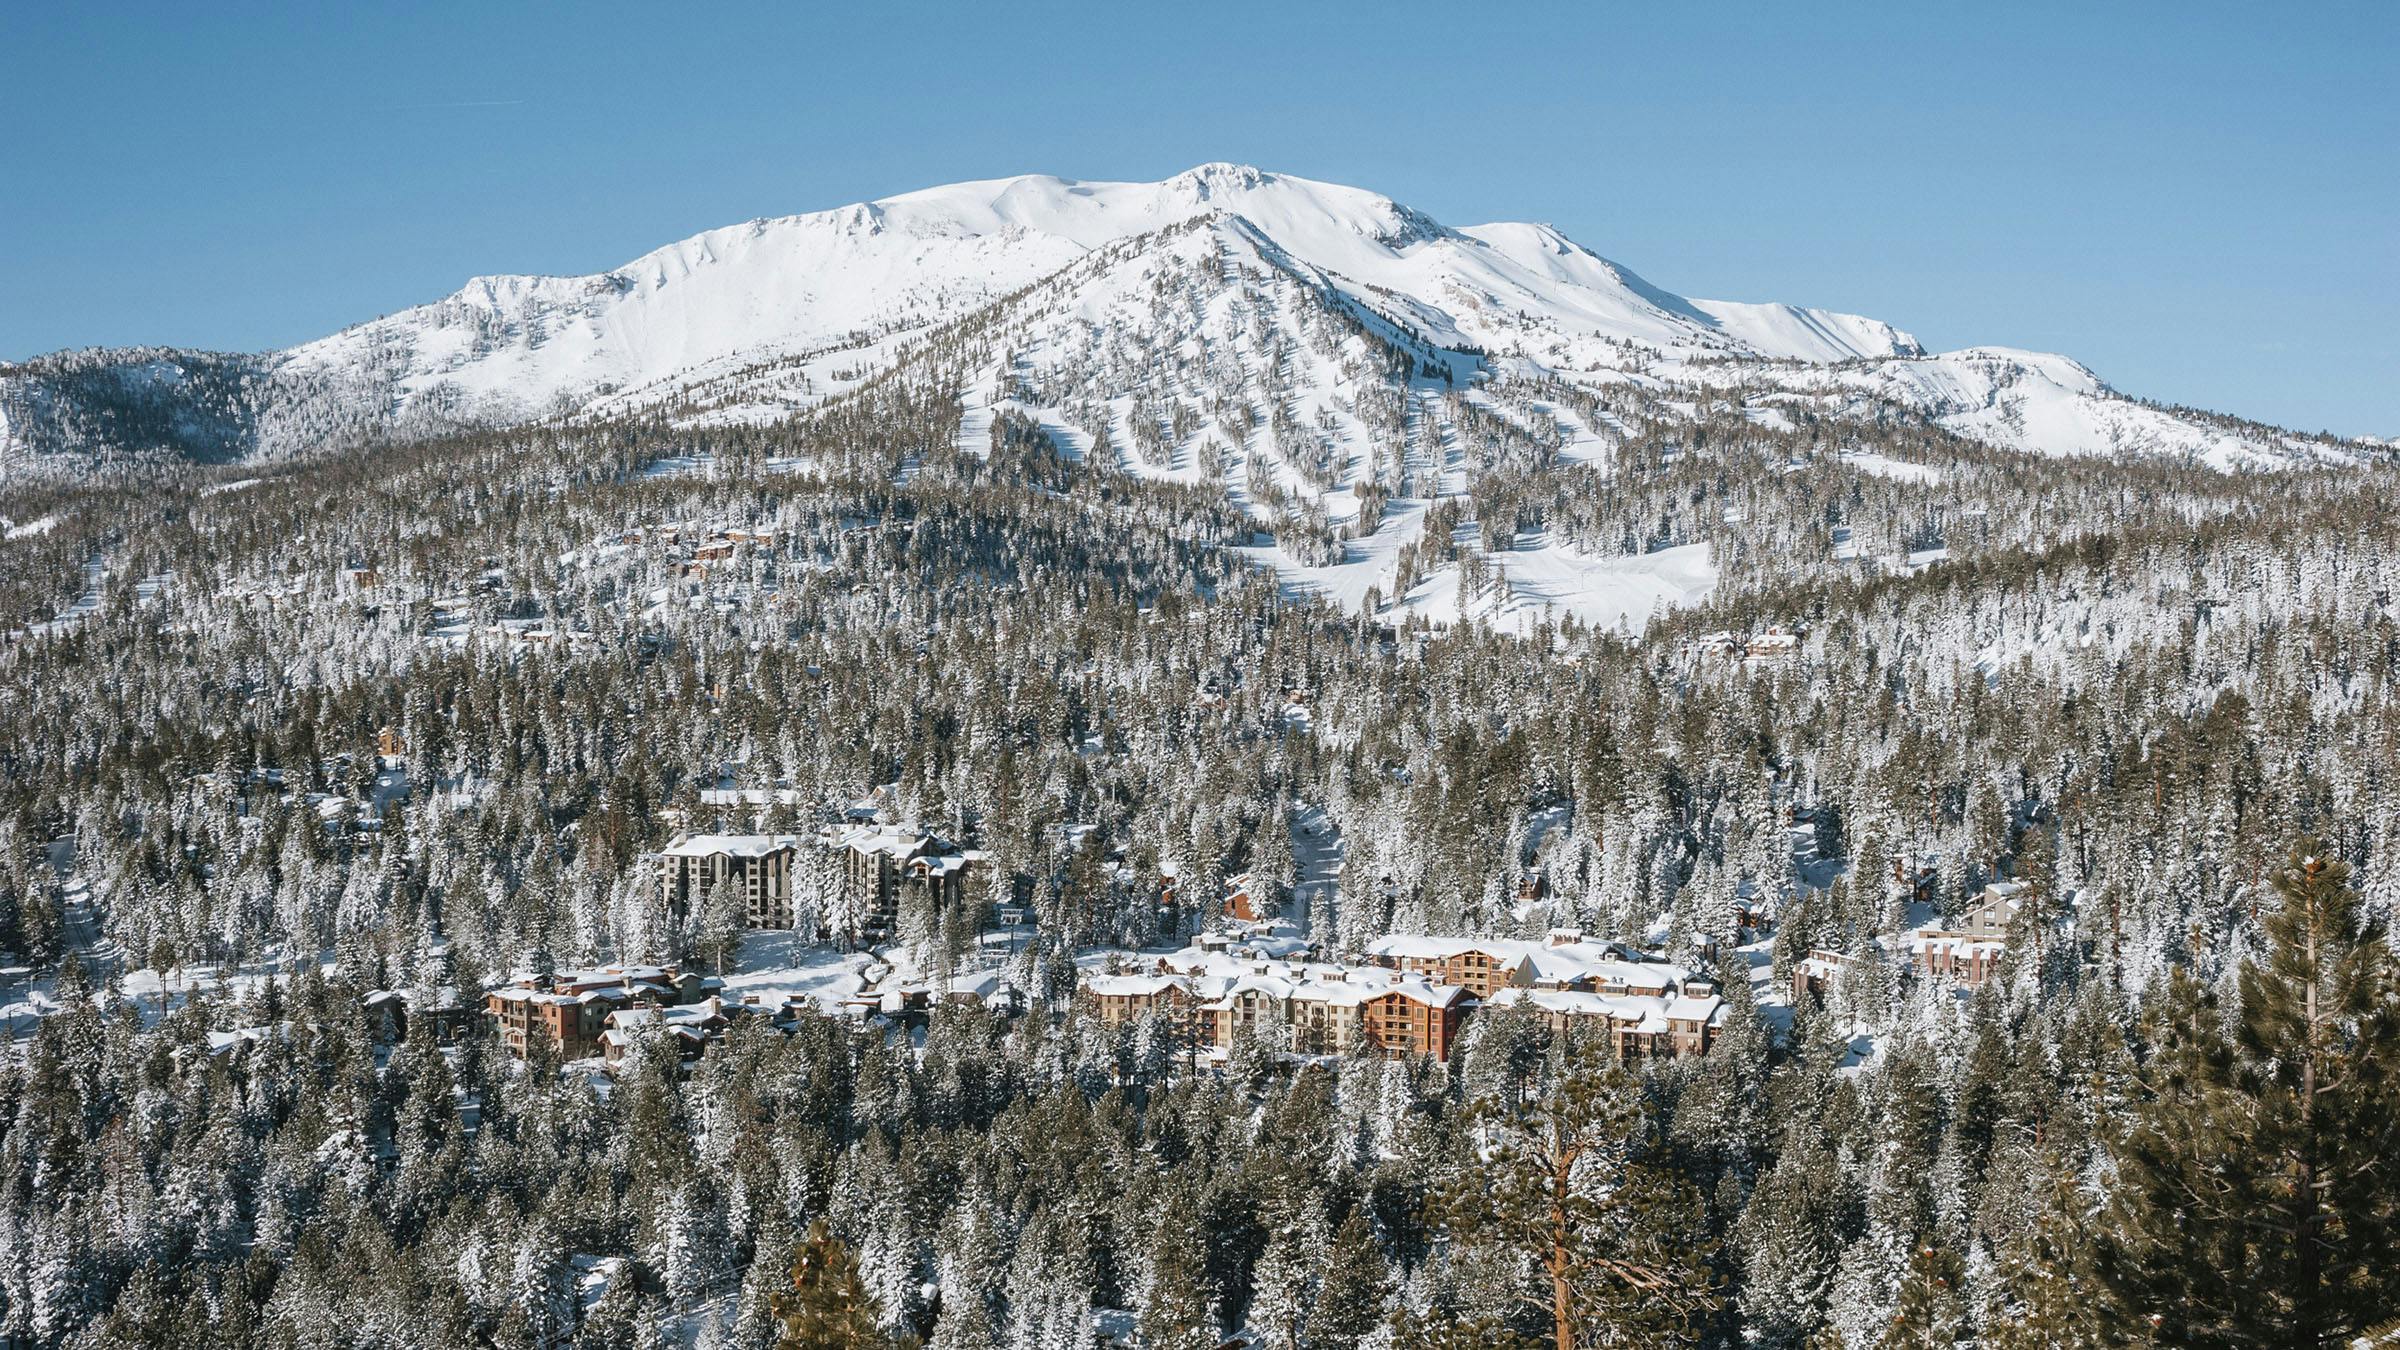 View of snow-covered Mammoth Mountain overlooking The Village at Mammoth